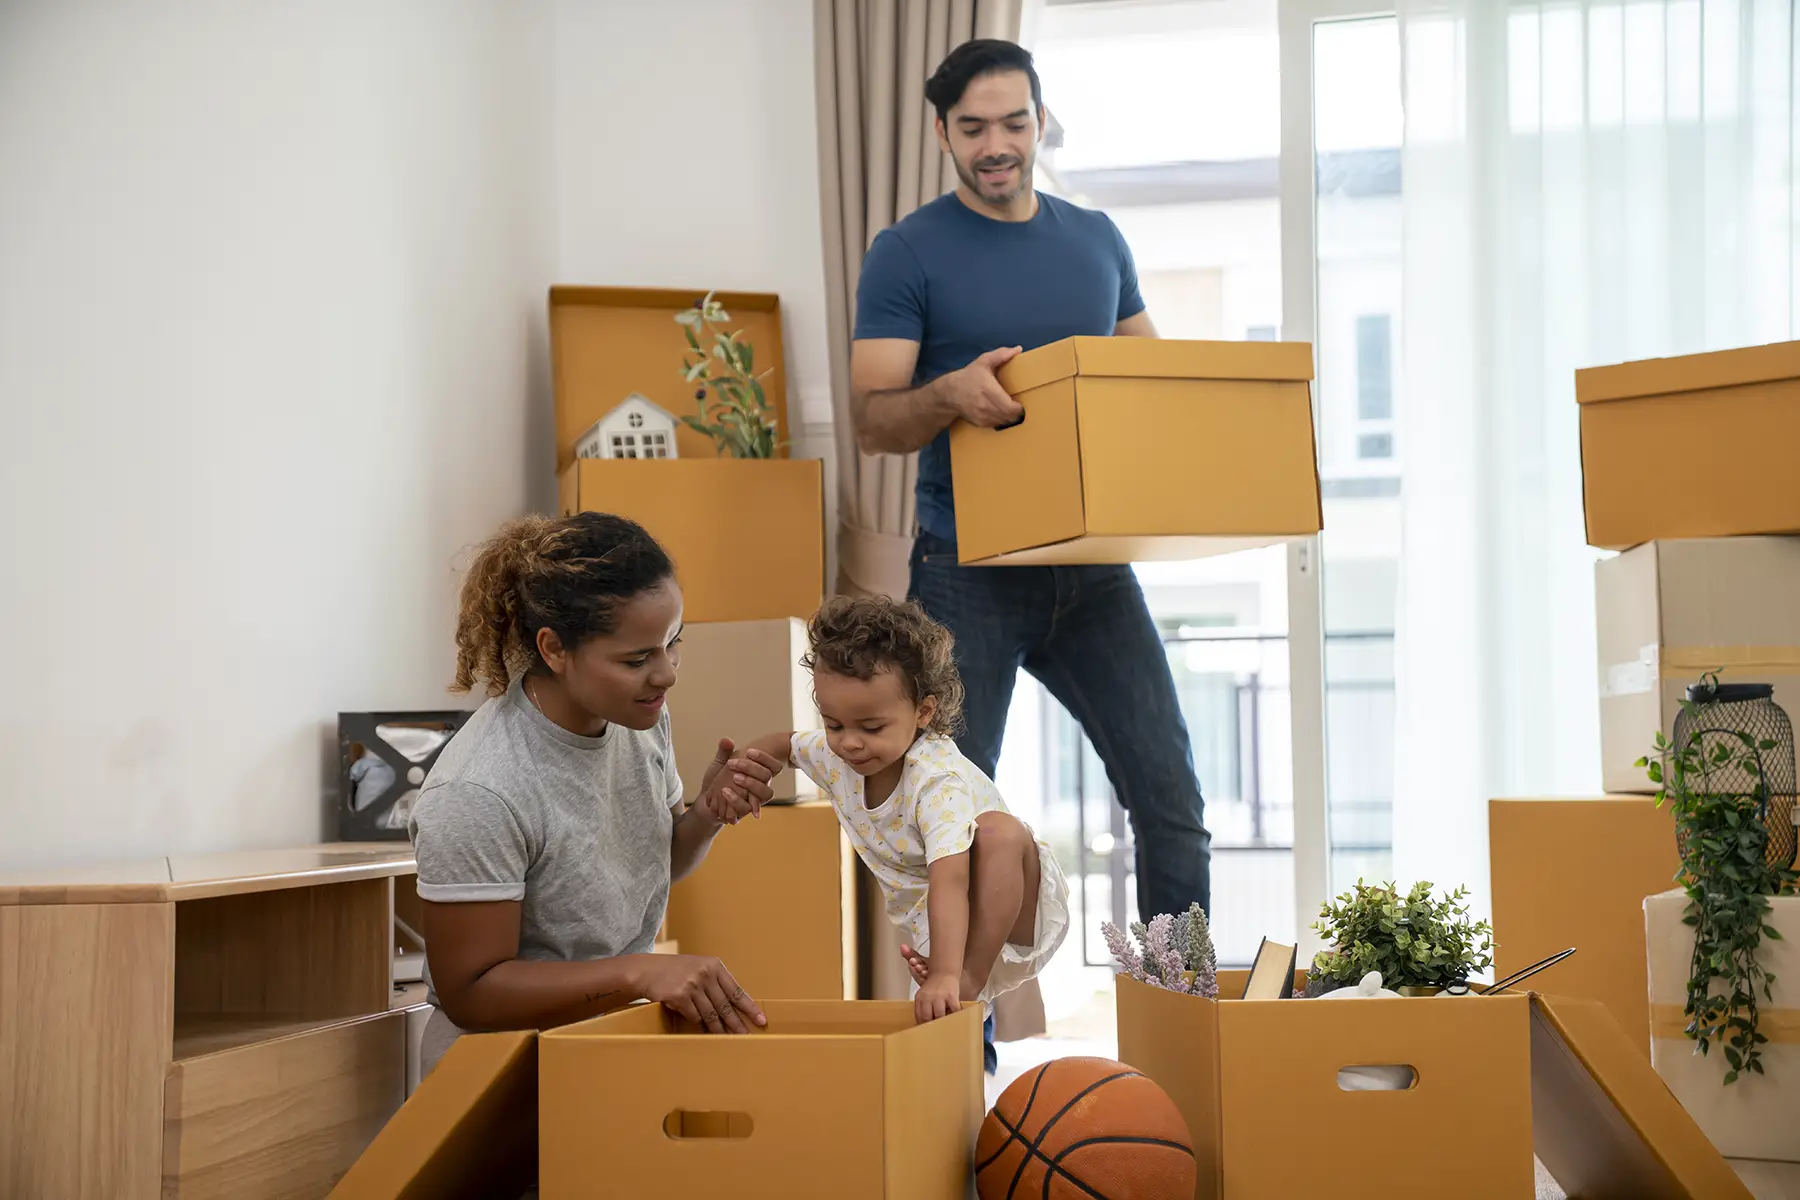 Parents playing with a small child in their new apartment full of moving boxes